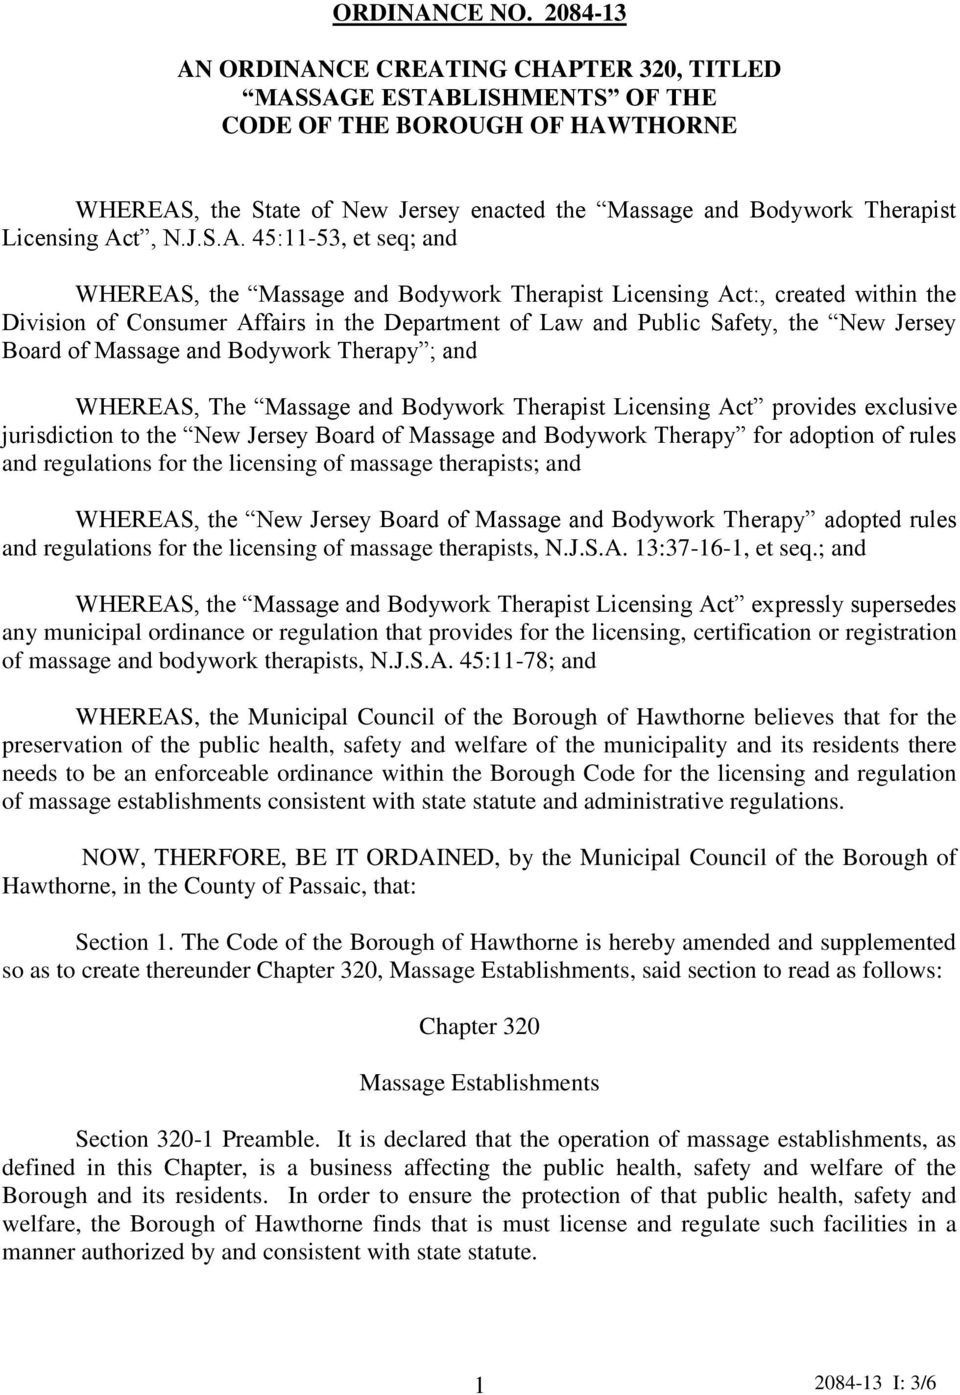 Act, N.J.S.A. 45:11-53, et seq; and WHEREAS, the Massage and Bodywork Therapist Licensing Act:, created within the Division of Consumer Affairs in the Department of Law and Public Safety, the New